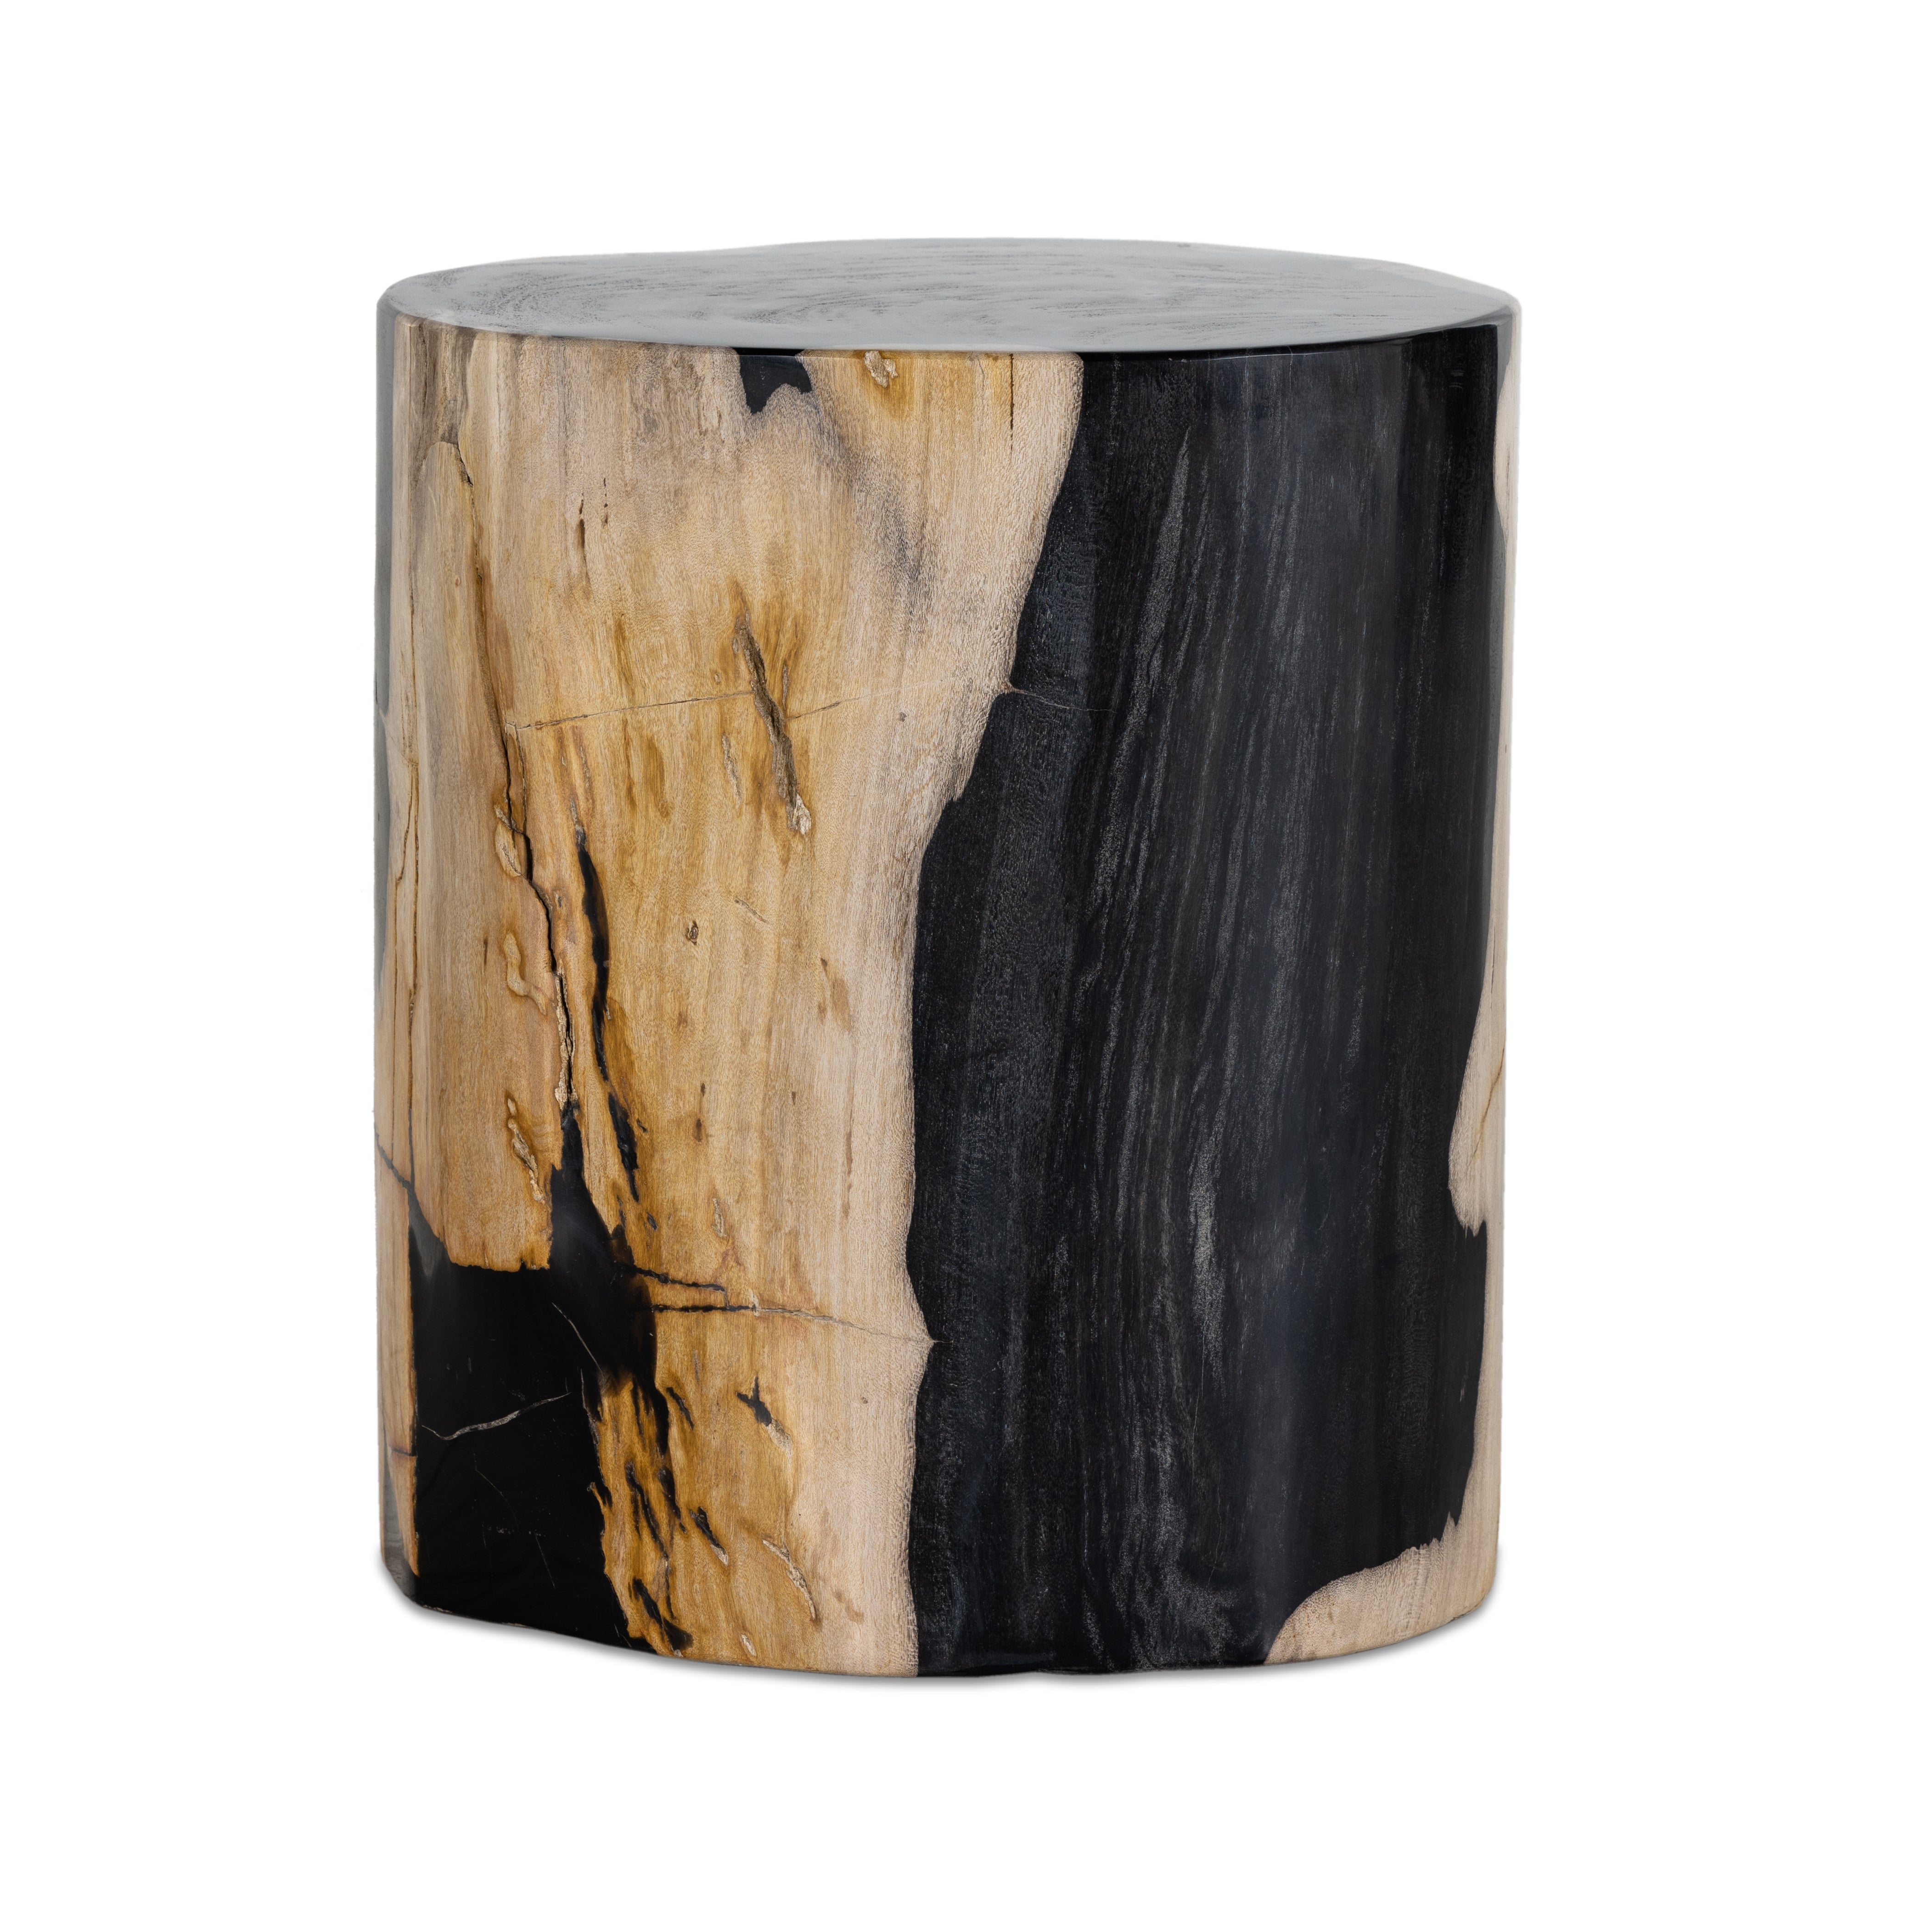 Naturally petrified wood with dramatic highs and lows makes for a stunning end table. Showcasing organic patterns with cracks and graining, the lightly hued tree stump has a rich, organic look. A variance in color and texture is to be expected from piece to piece. Amethyst Home provides interior design, new construction, custom furniture, and area rugs in the Omaha metro area.